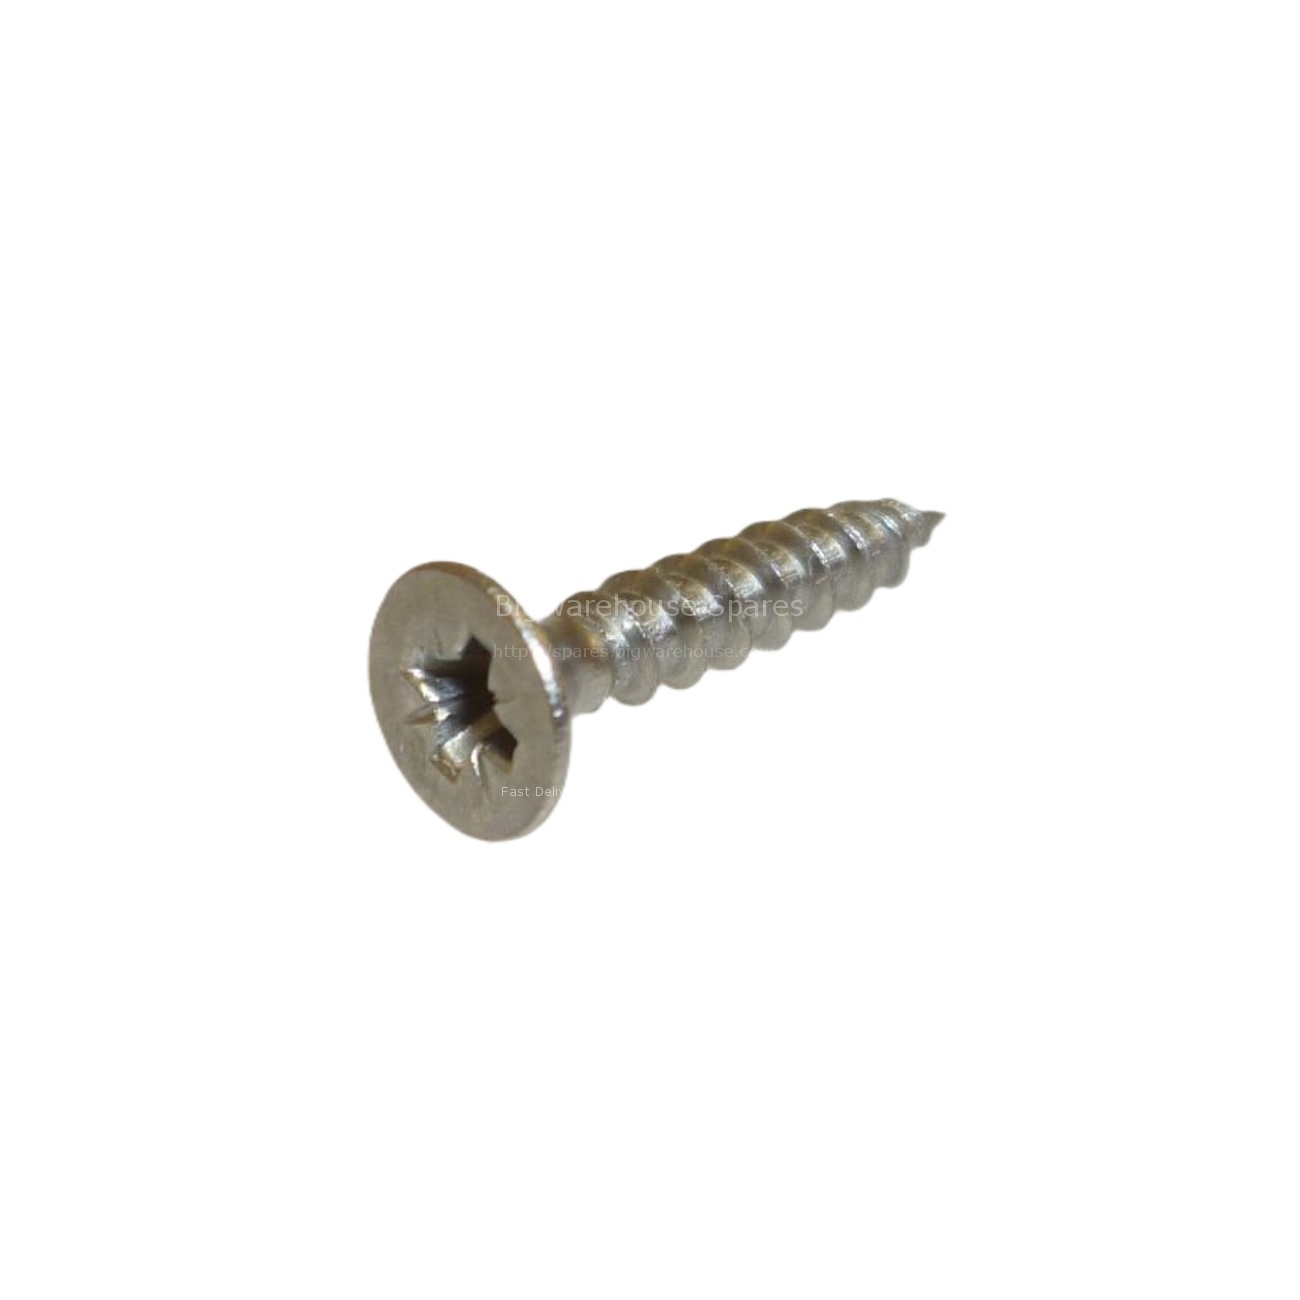 SCREW FOR CHIPBOARD M2.9x16